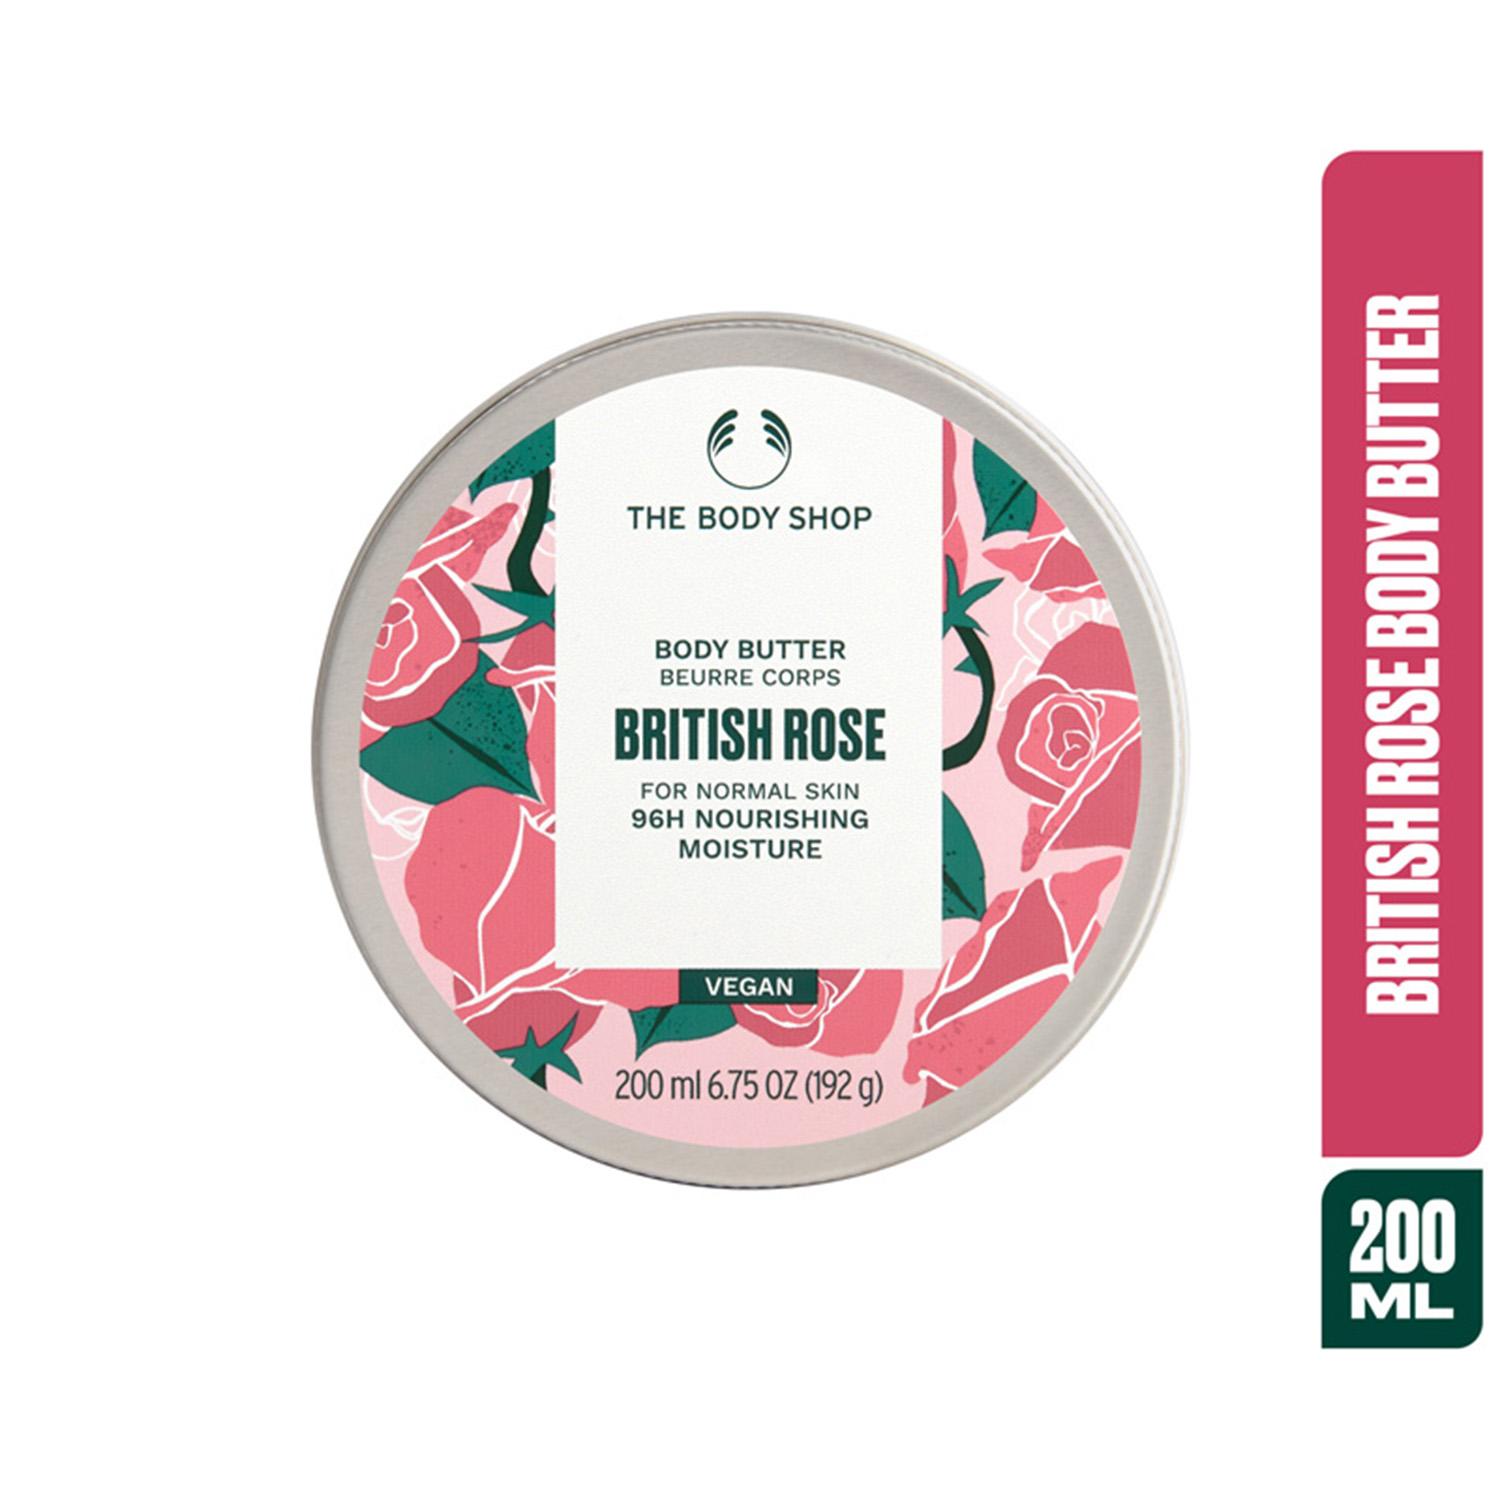 The Body Shop British Rose Body Butter (200ml)